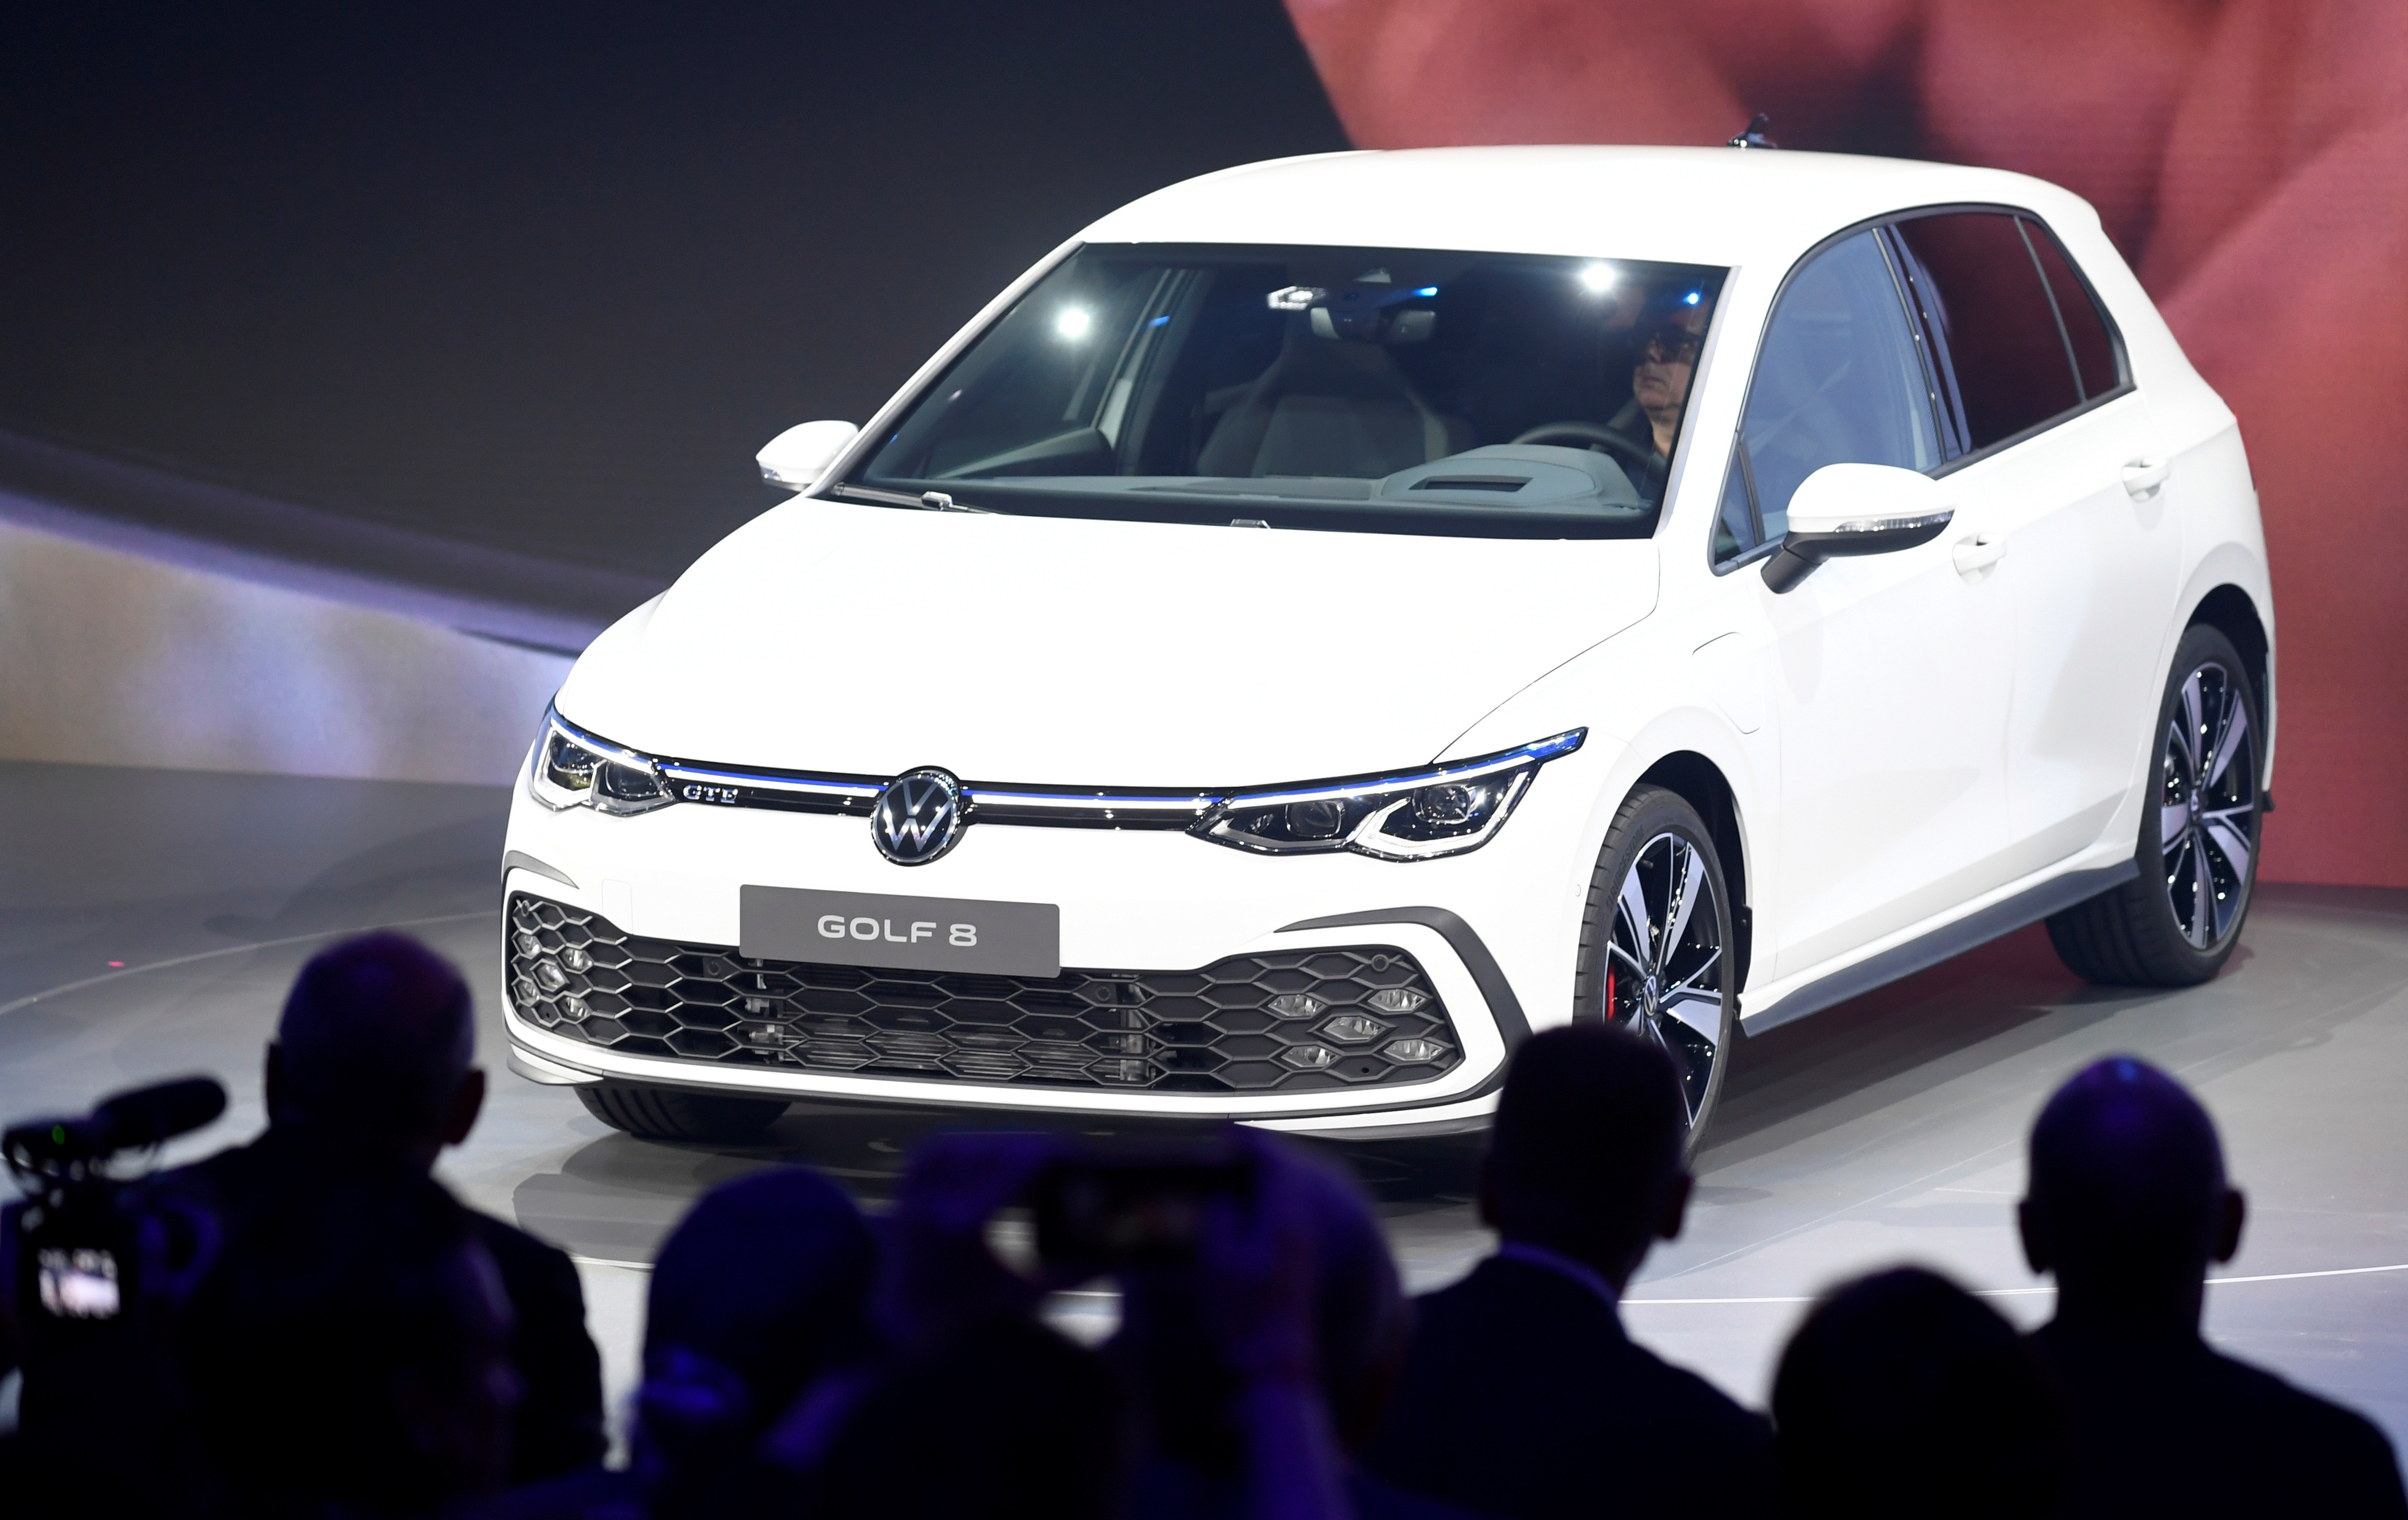 Presentation of the new Golf 8 car at the Volkswagen plant in Wolfsburg